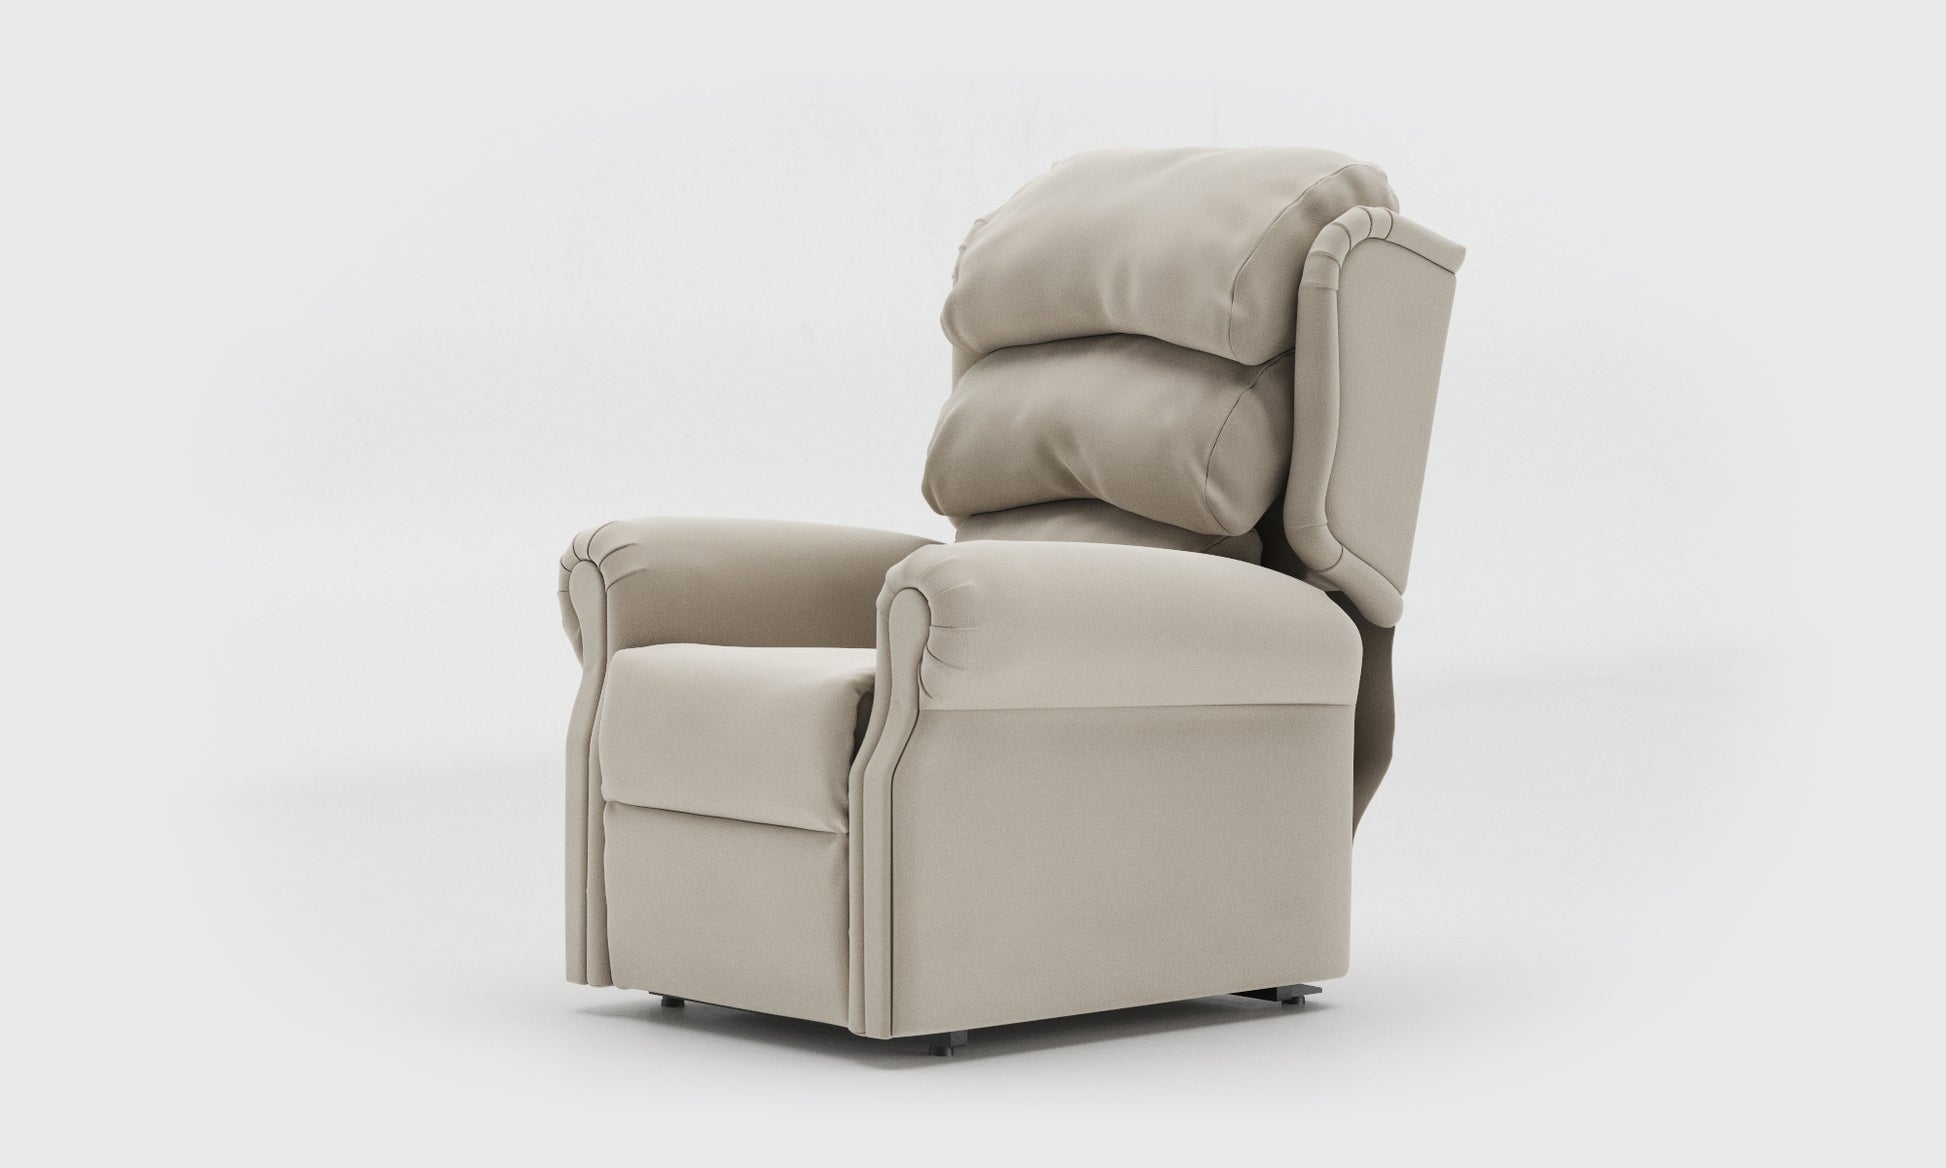 adara rise recliner chair compact waterfall leather sisal